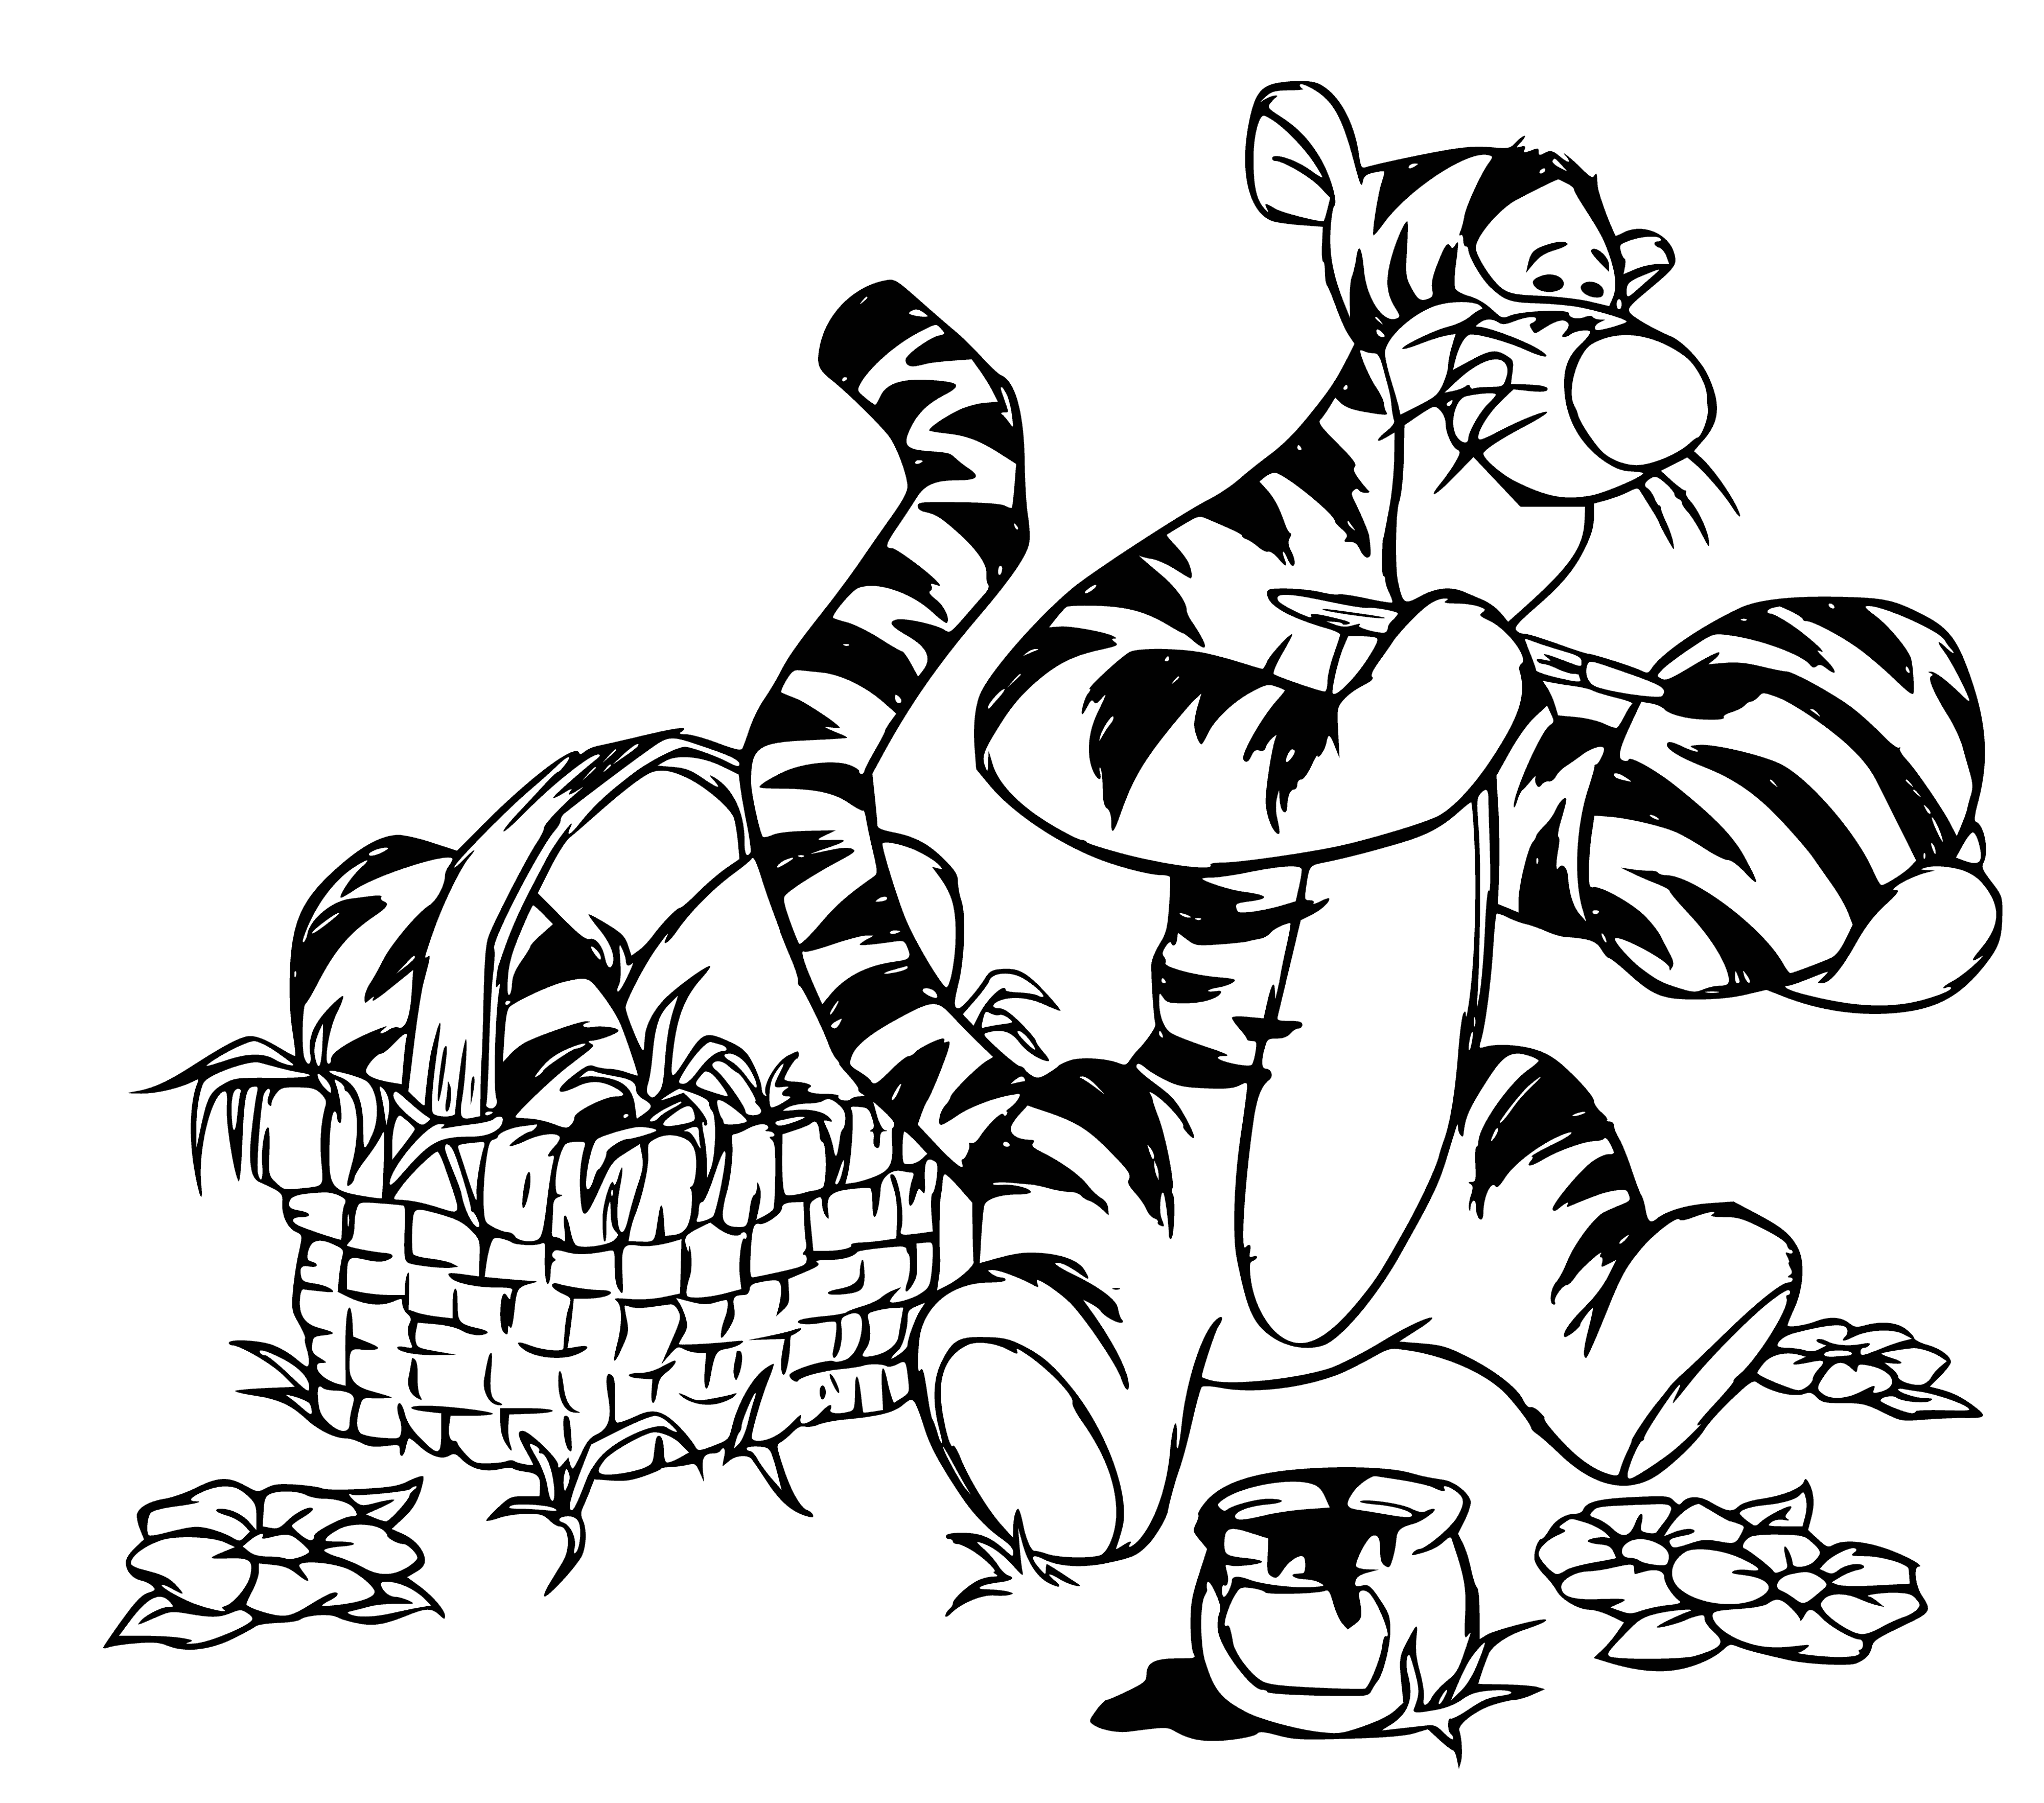 Tigger paints eggs coloring page